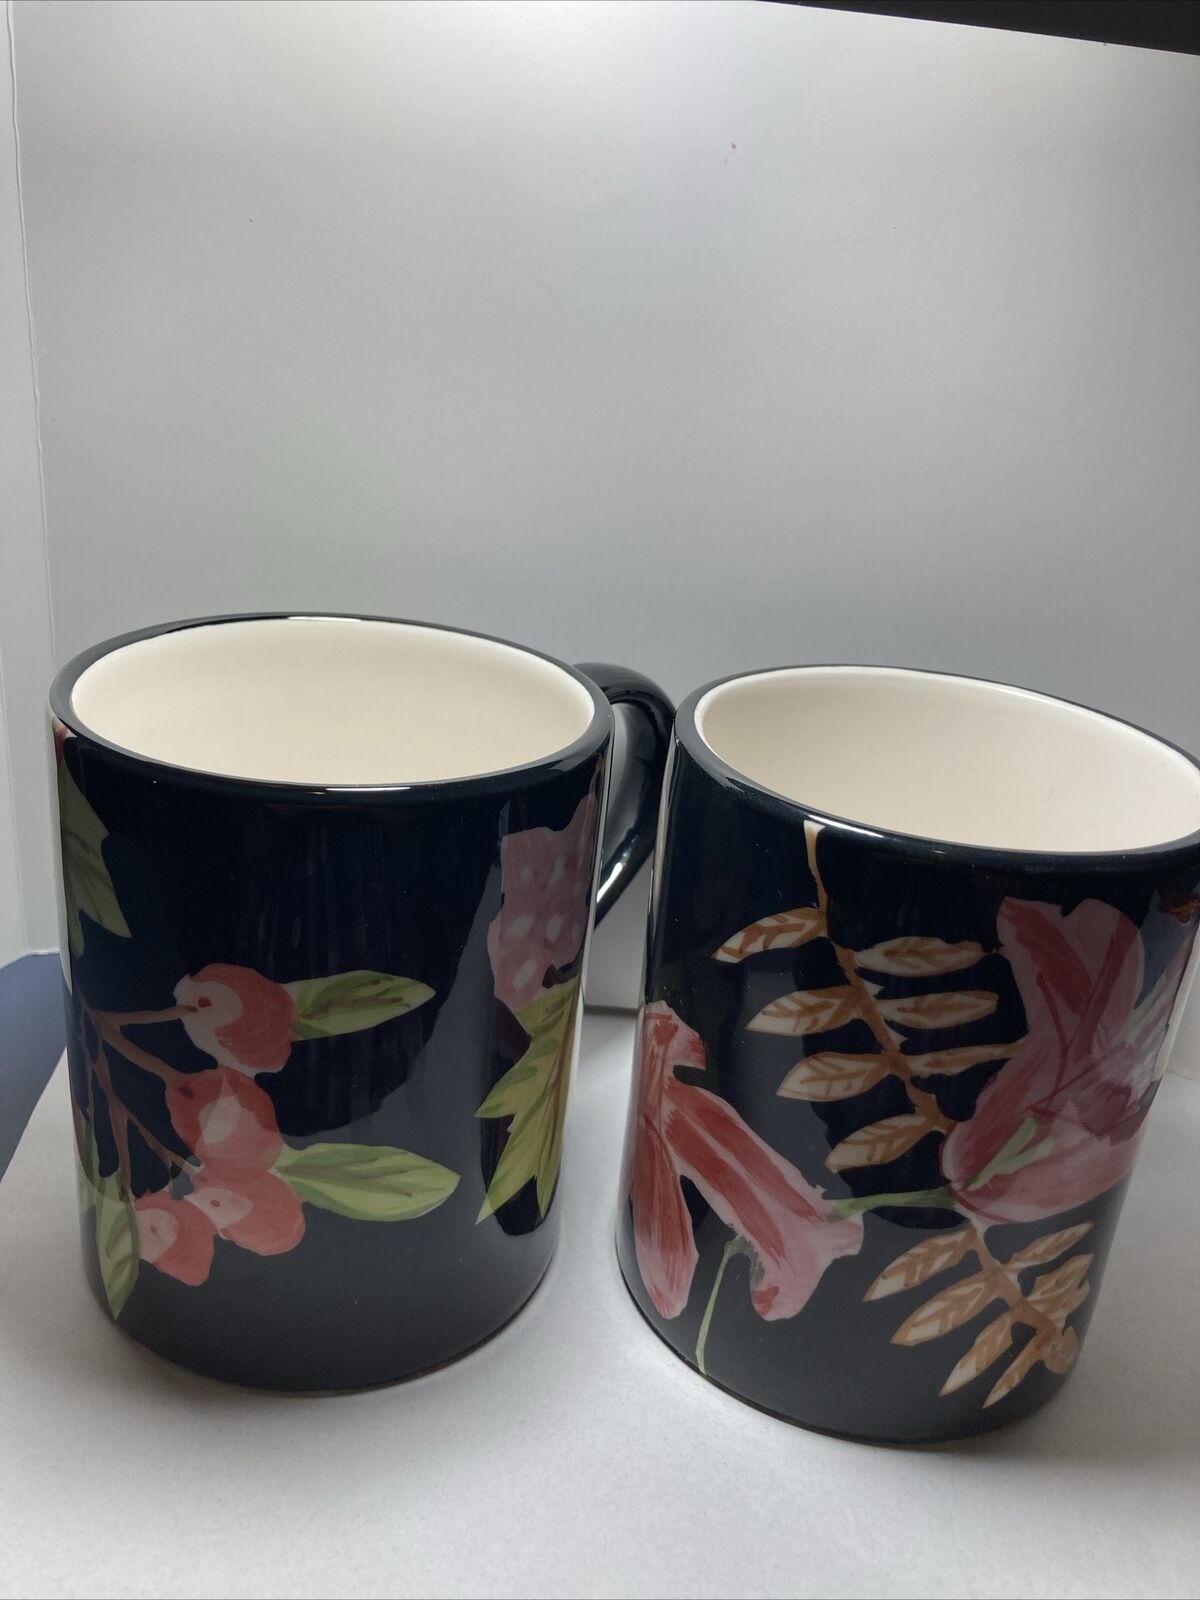 Totally Today Set Of 2 Black Coffee Mugs Fruit And Flowers Designs Hand Painted